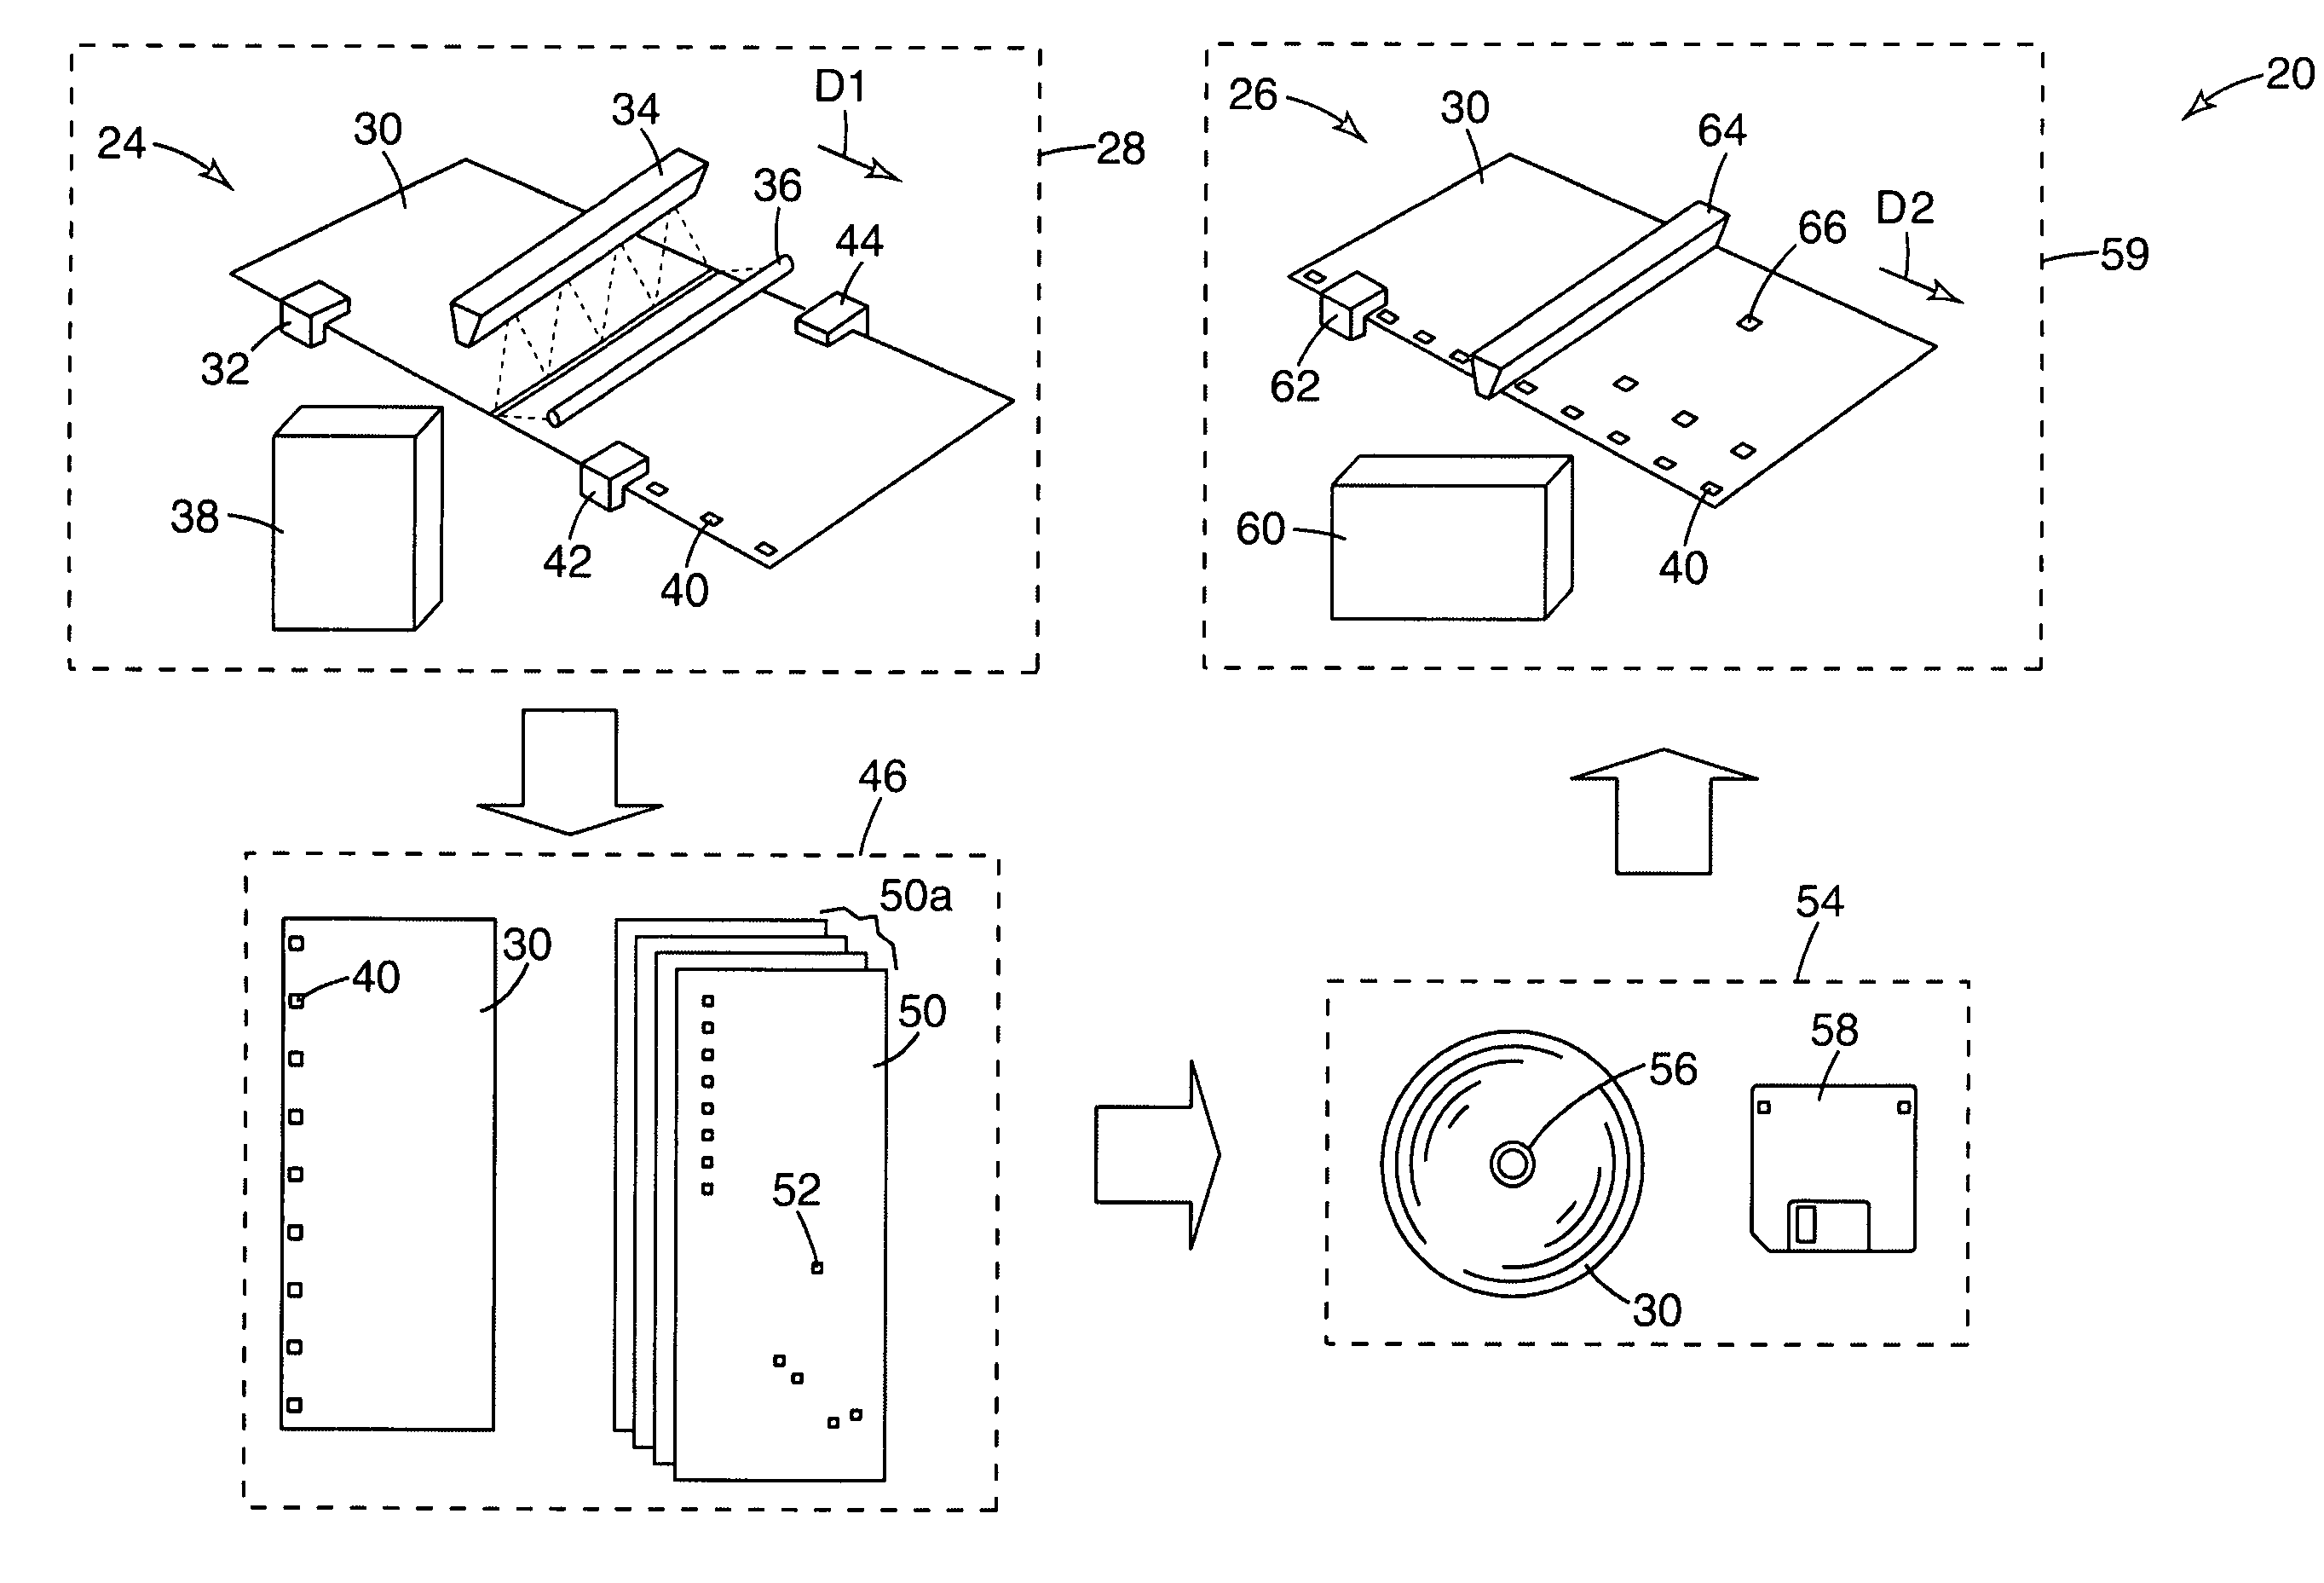 Apparatus and method for the automated marking of defects on webs of material